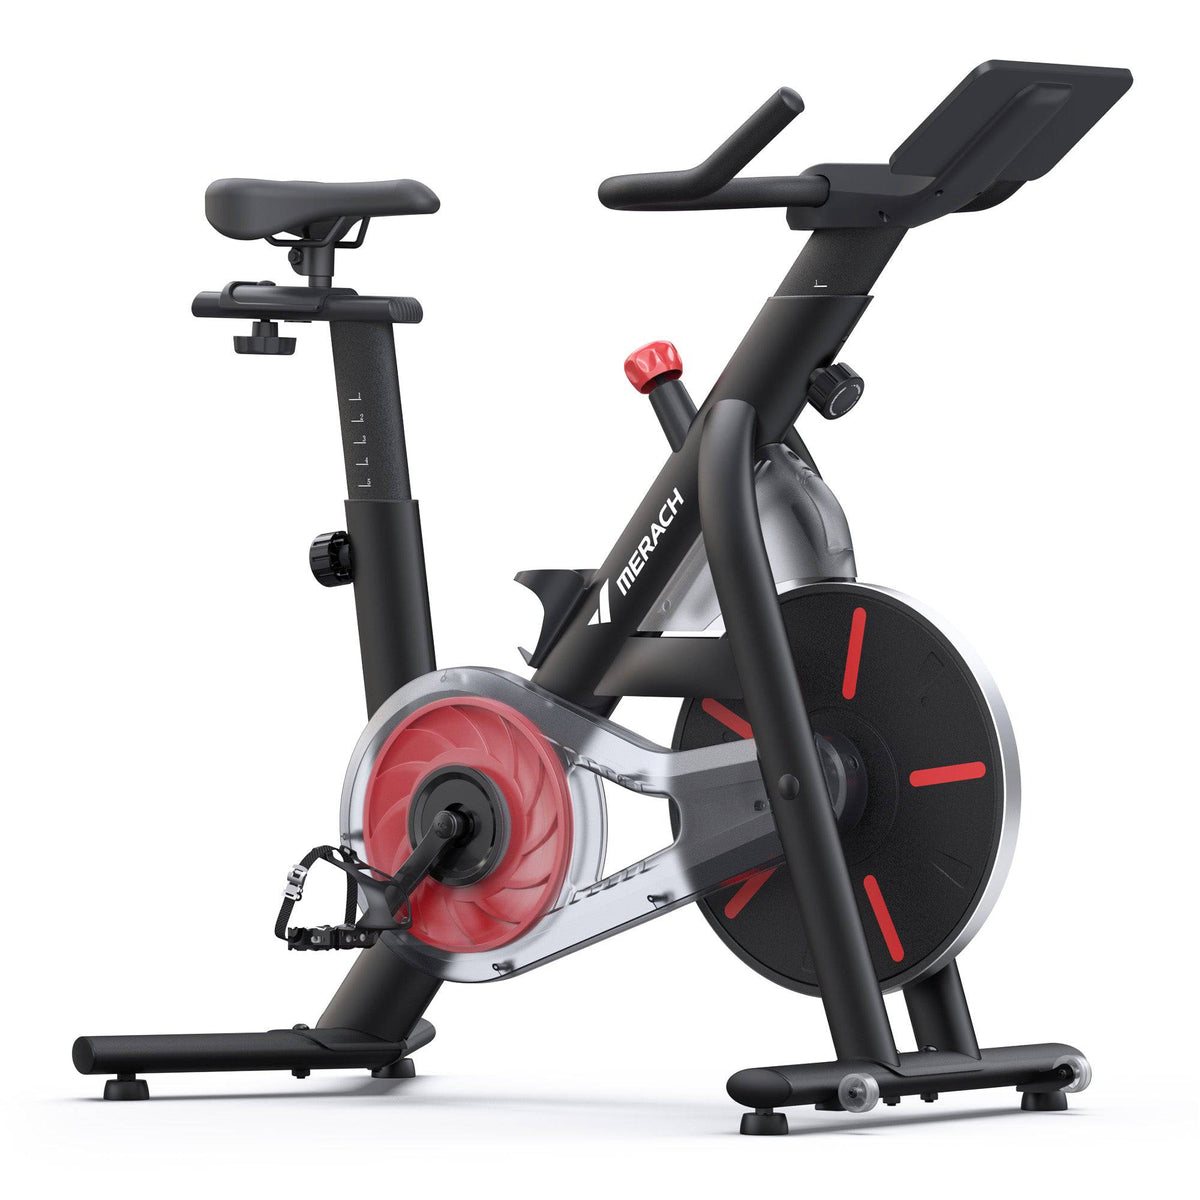 MERACH Home Exercise Bikes Stationary Bikes Series For Sale